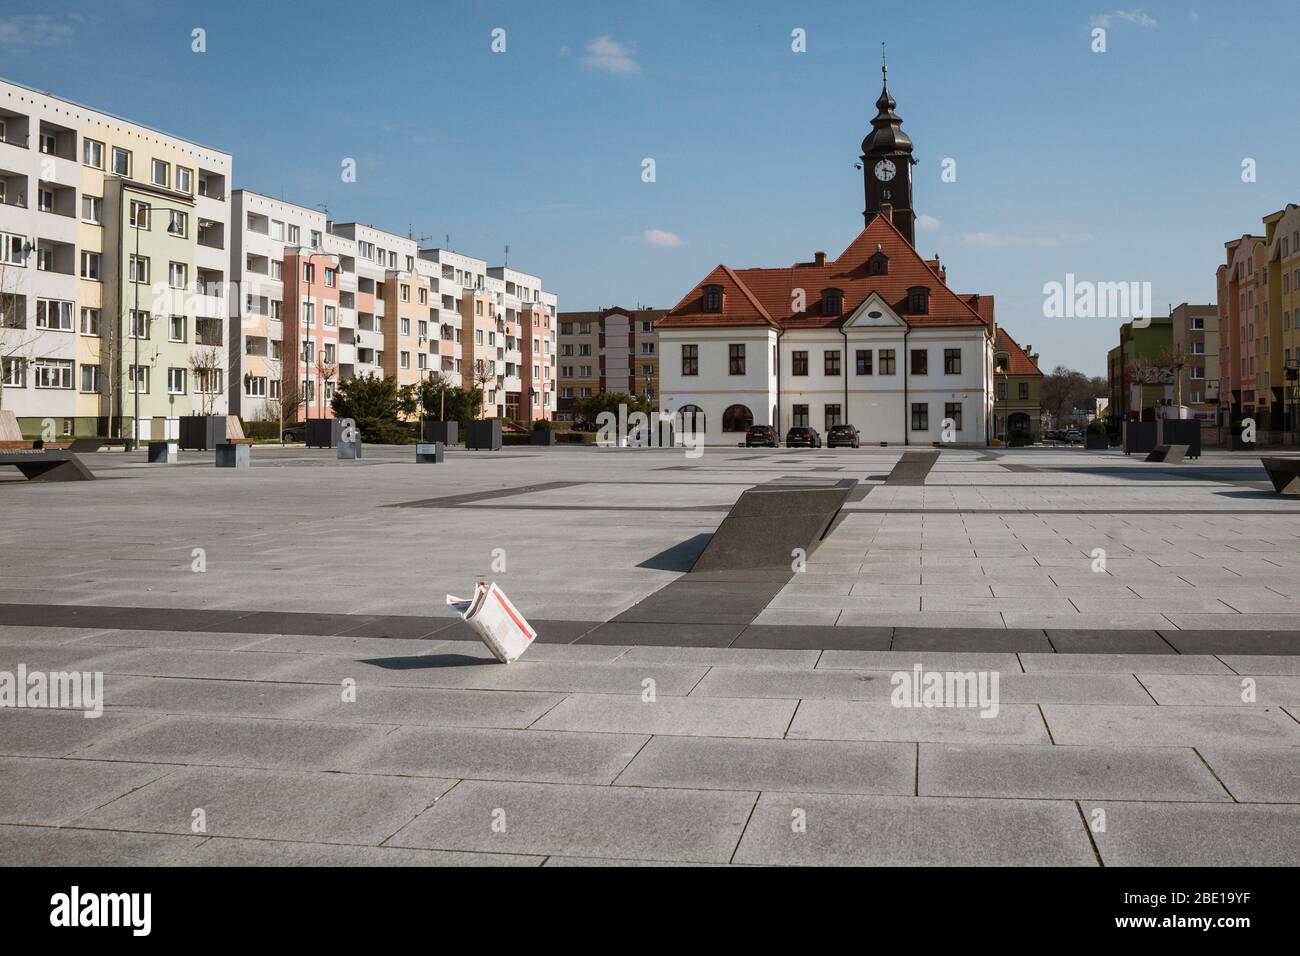 LUBIN, POLAND - APRIL 2, 2020. Empty city center of Lubin in Poland with no  people due to coronavirus pandemic and action stay at home Stock Photo -  Alamy